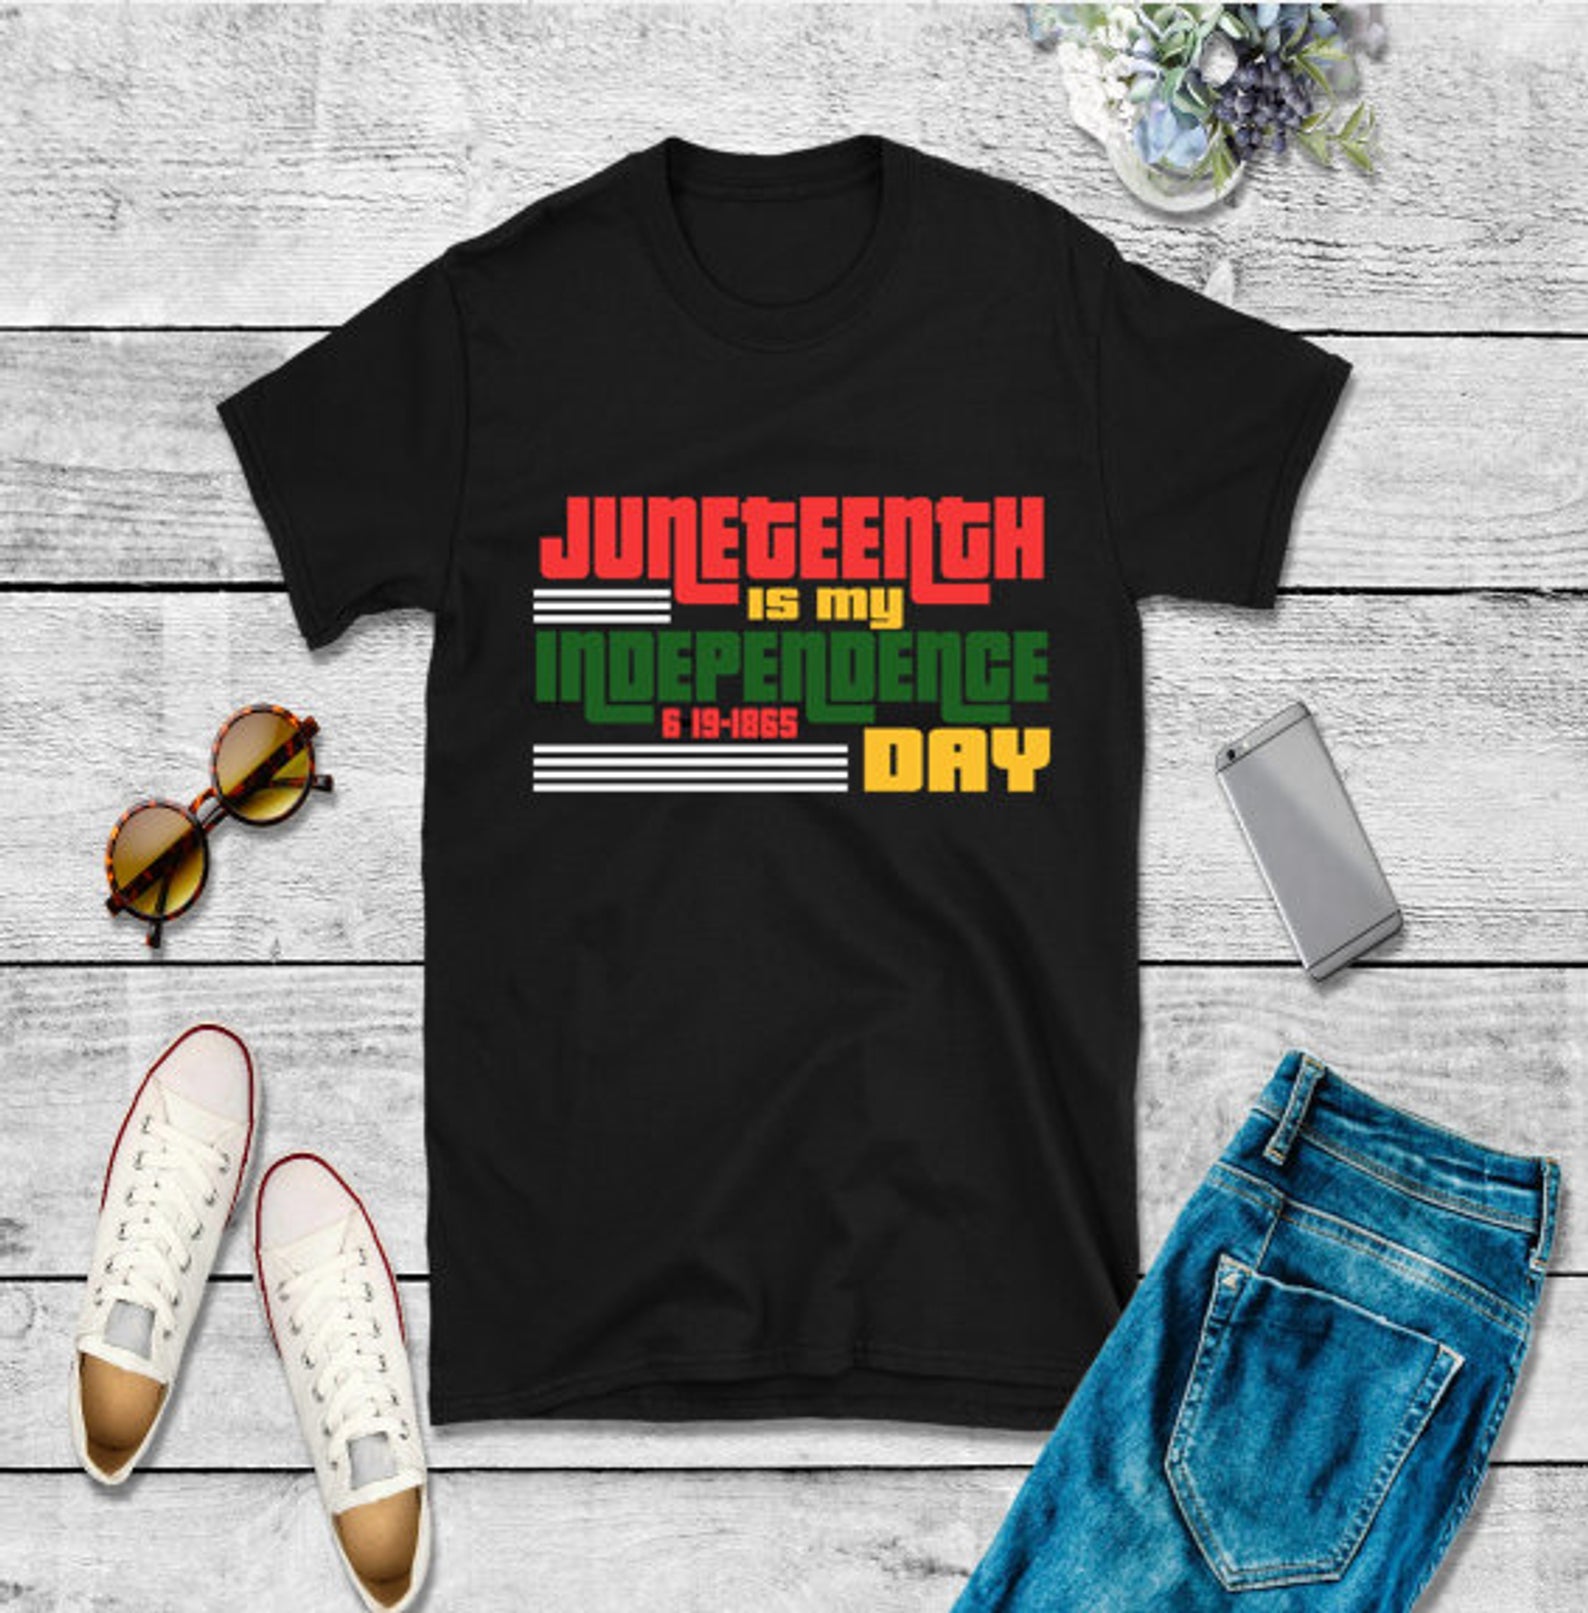 It’s Juneteenth! Here Are The T-Shirts You Need to Celebrate Our Freedom In Style